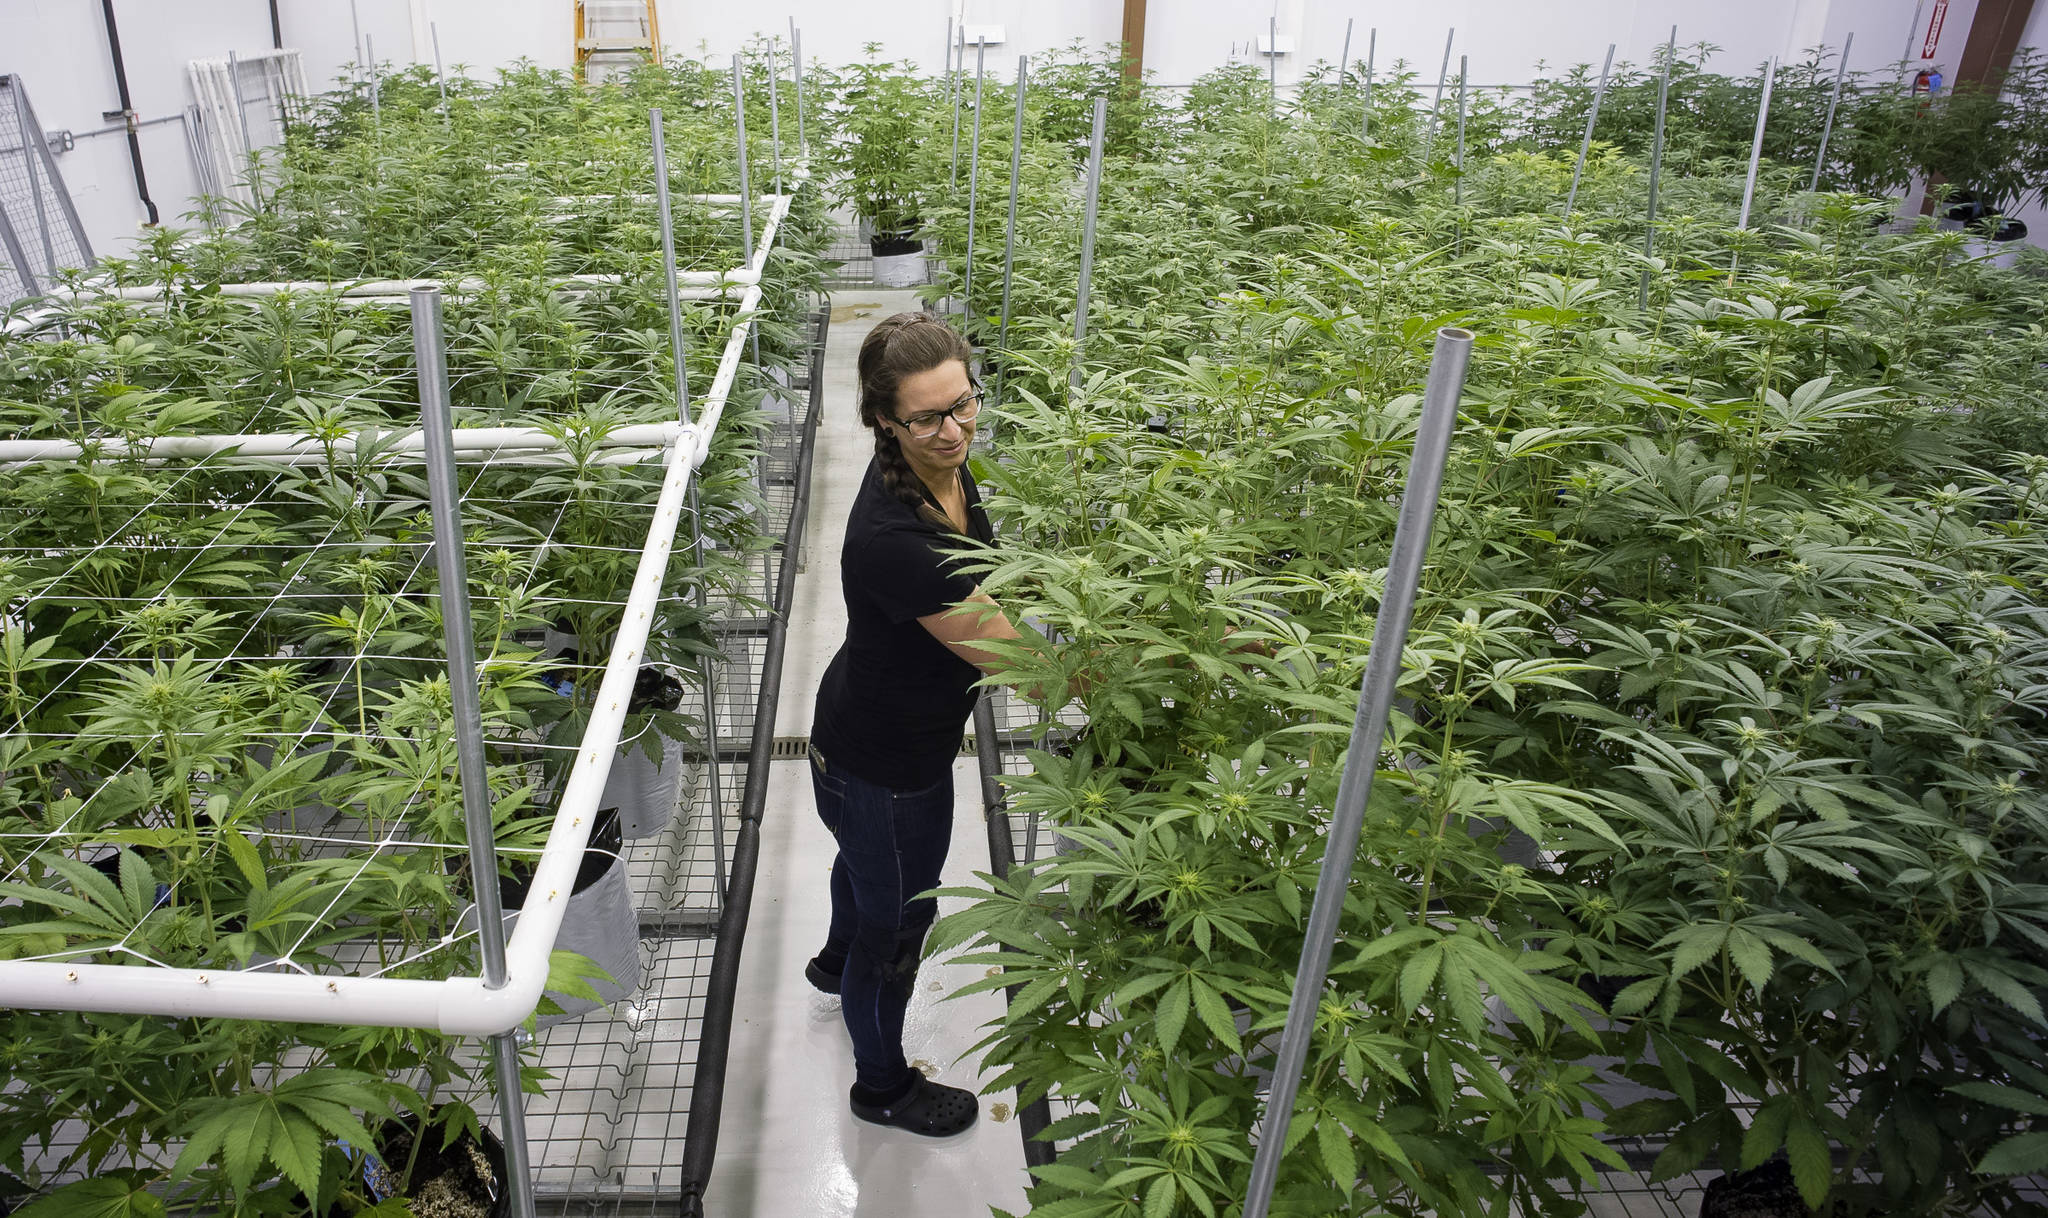 THC Alaska head cultivator Naomi Hamb tends to marijuana plants at the company’s Juneau facility on Thursday, July 27, 2017. The business is owned by Ben and Lacy Wilcox, John Nemeth and Tracy LaBarge. (Michael Penn | Juneau Empire)